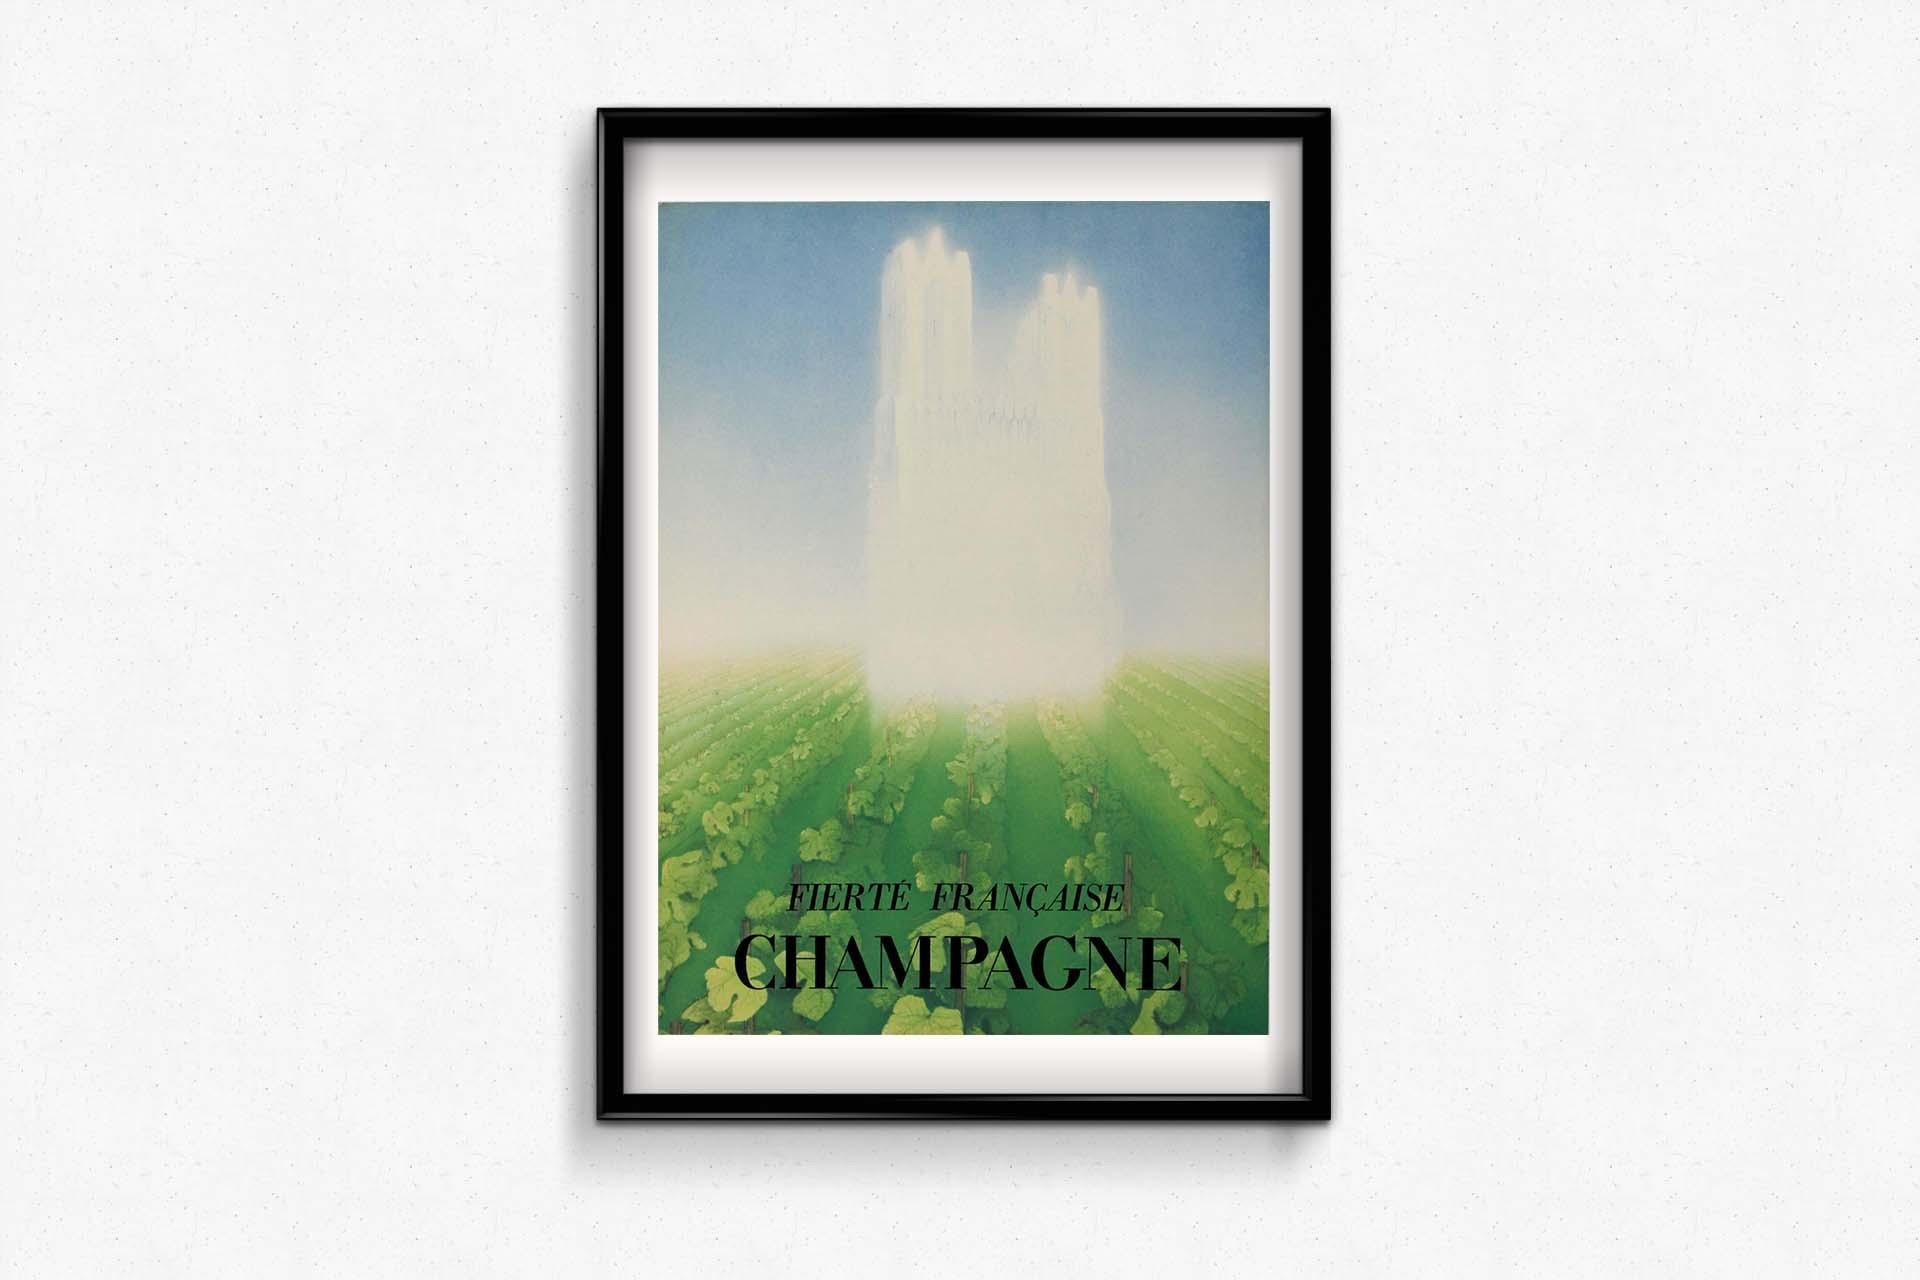 1932 original poster by Paul Iribe Fierté Française Champagne For Sale 1